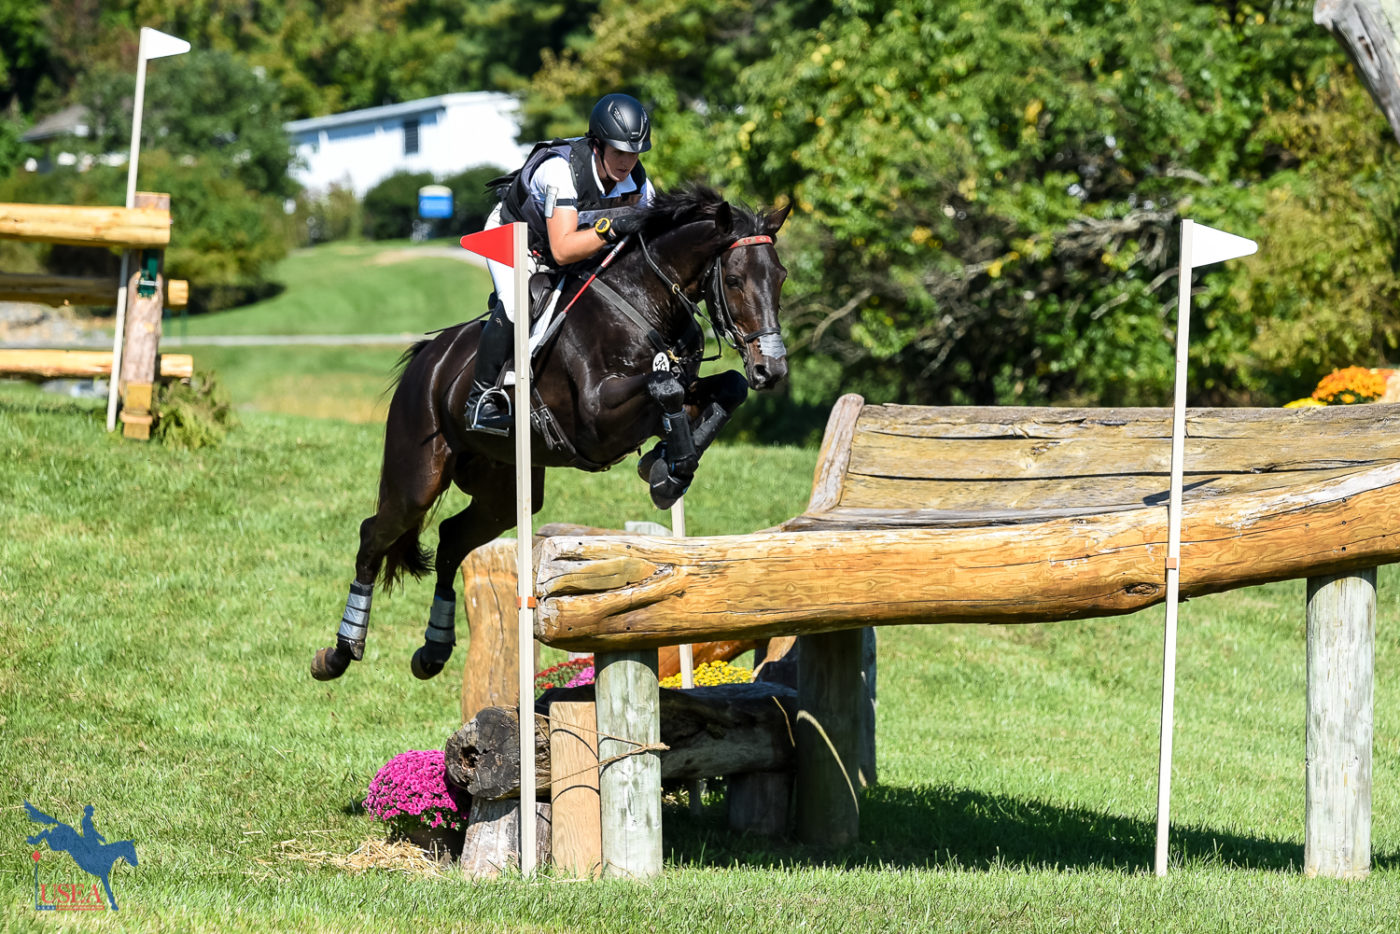 Ema Klugman and her longtime partner Bendigo moved up from 20th place to seventh place with the fastest cross-country round of the day in the Advanced divisions. USEA/Jessica Duffy Photo.